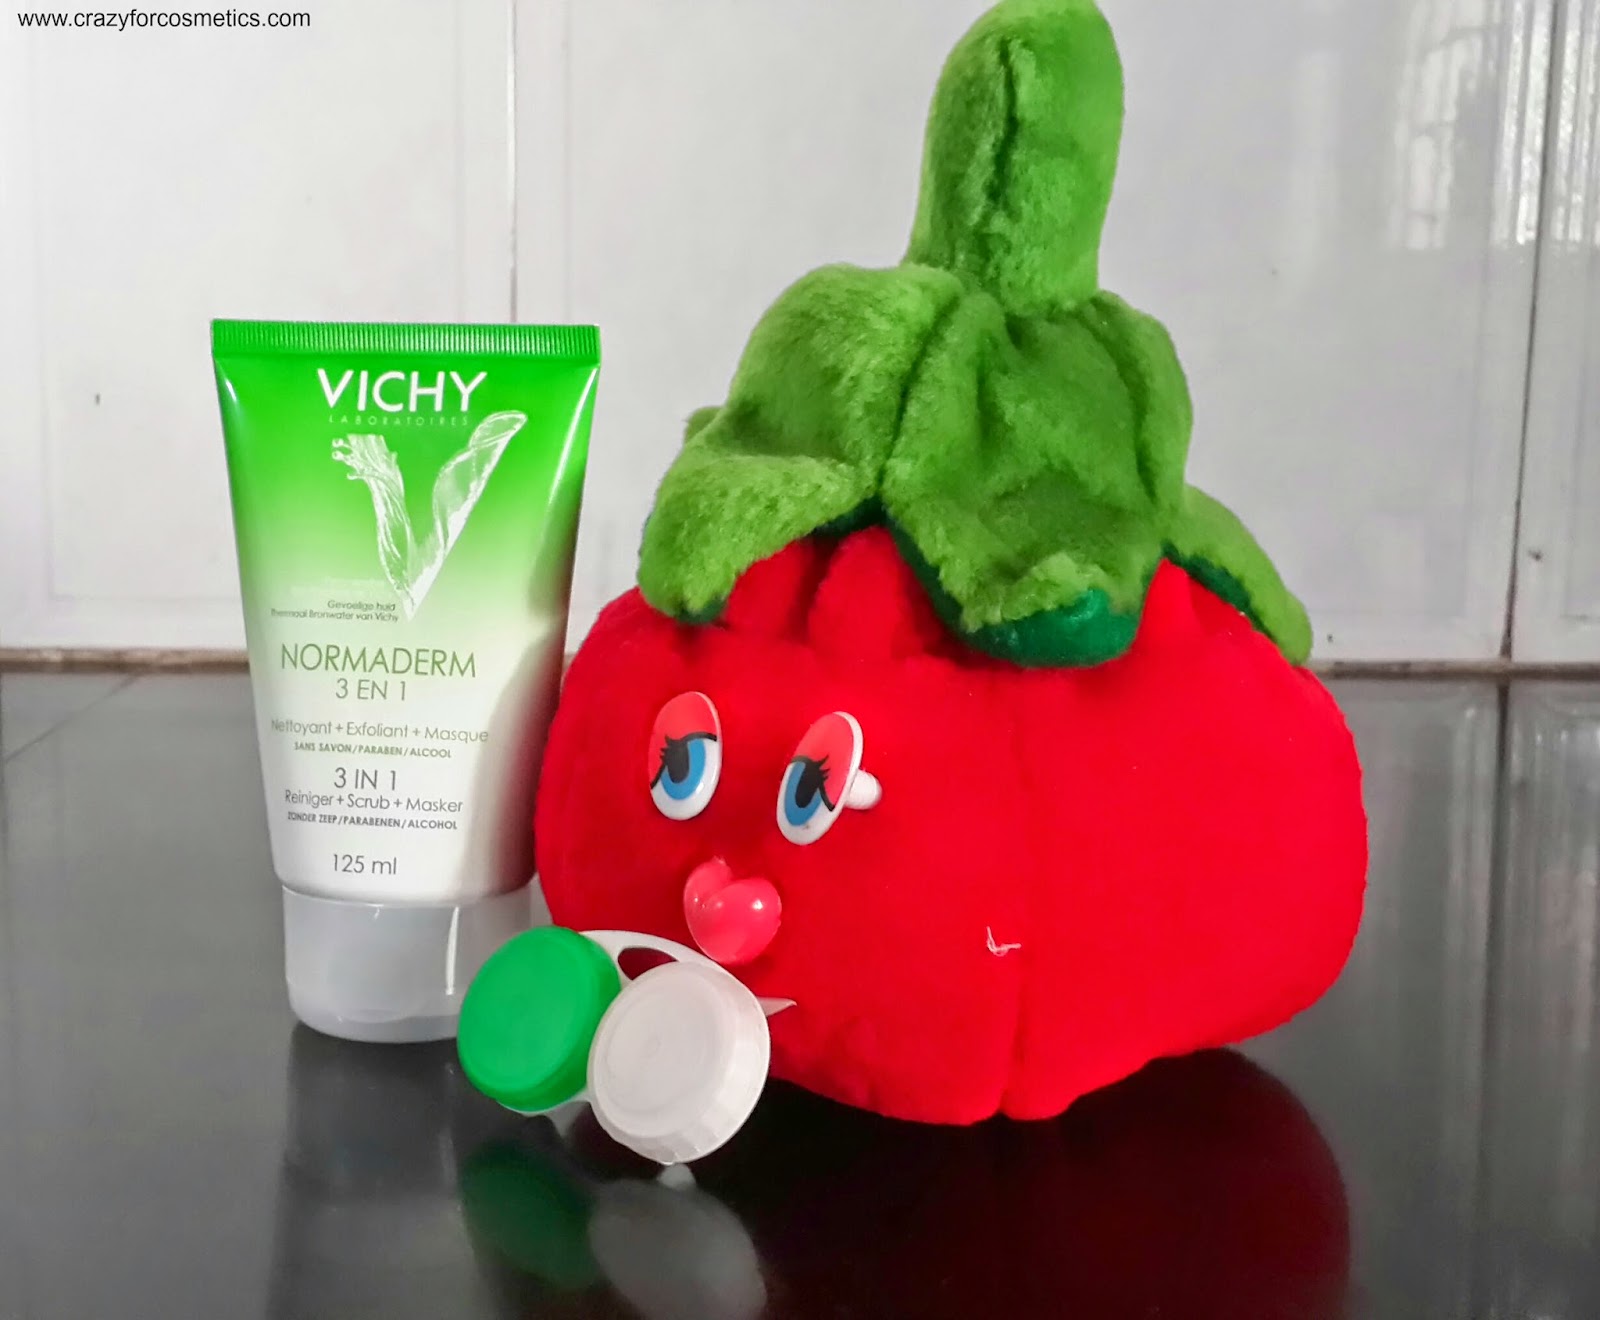 Vichy Normaderm 3 in 1 Cleanser Scrub Face mask review- Vichy 3 in 1 scrub mask review- Vichy 3 in 1 Scrub Face mask price- Vichy skincare range-Vichy Paris products